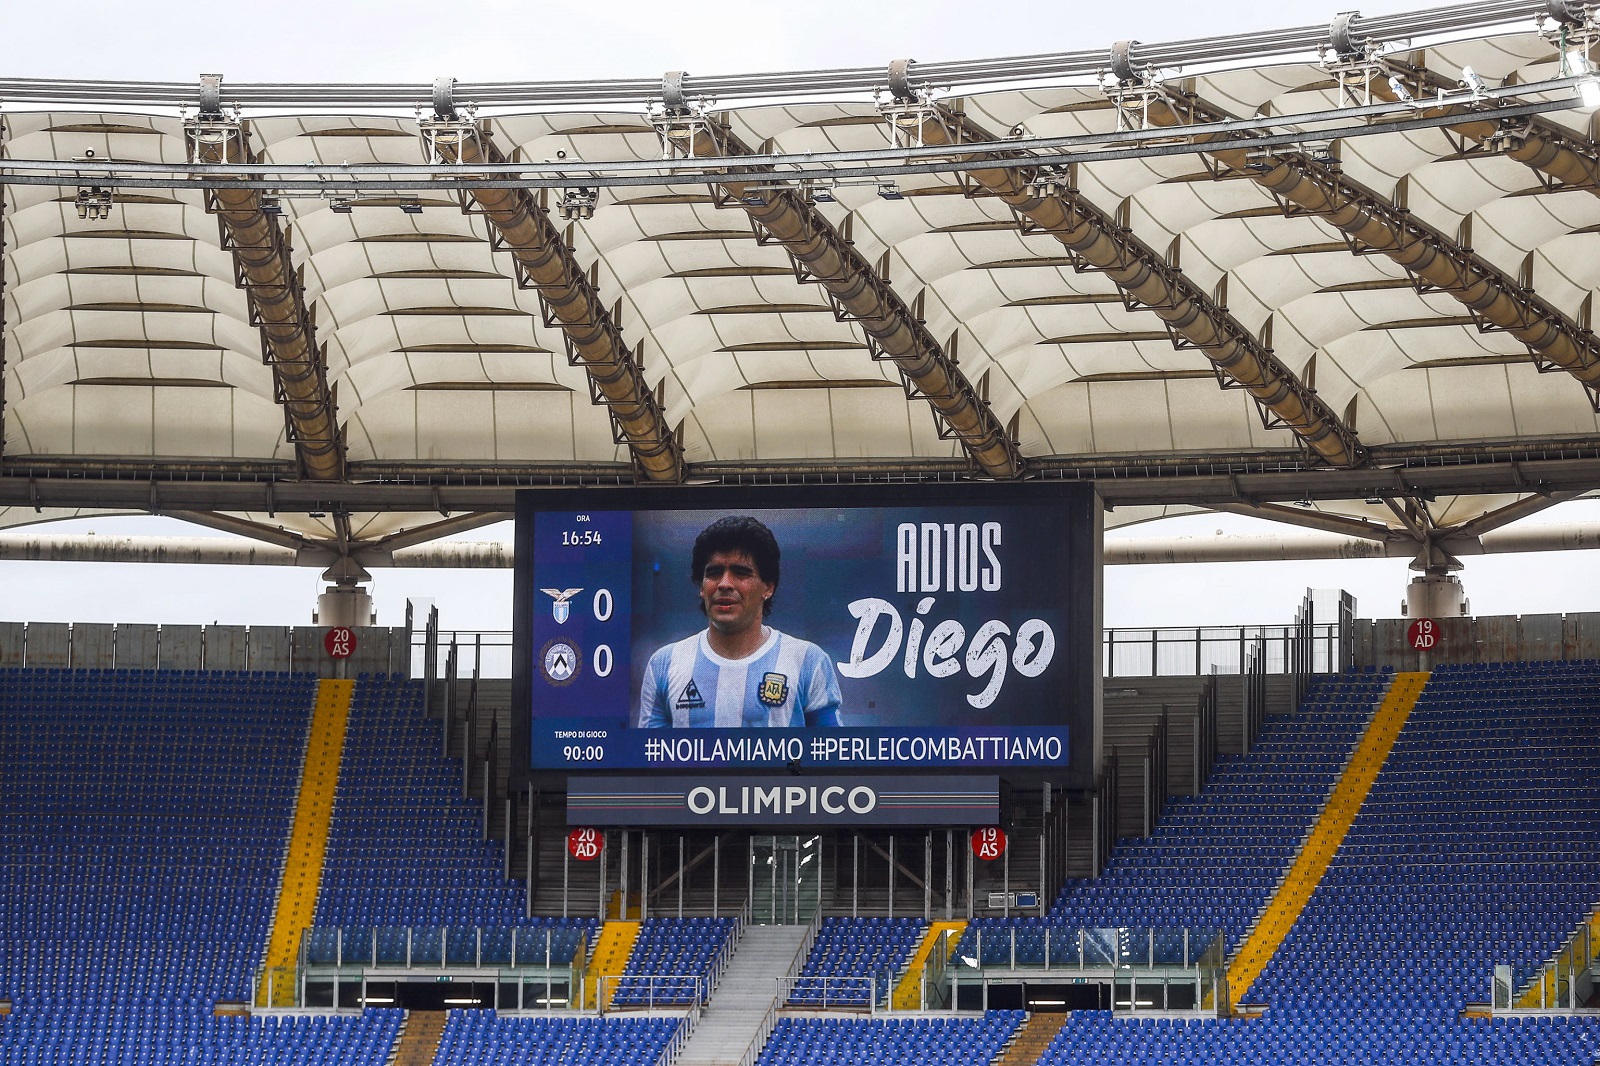 epa08850221 Late Argentinian soccer legend Diego Armando Maradona is displayed on a huge screen prior to the Italian Serie A soccer match SS Lazio vs Udinese Calcio at Olimpico stadium in Rome, Italy, 29 November 2020.  EPA/ANGELO CARCONI